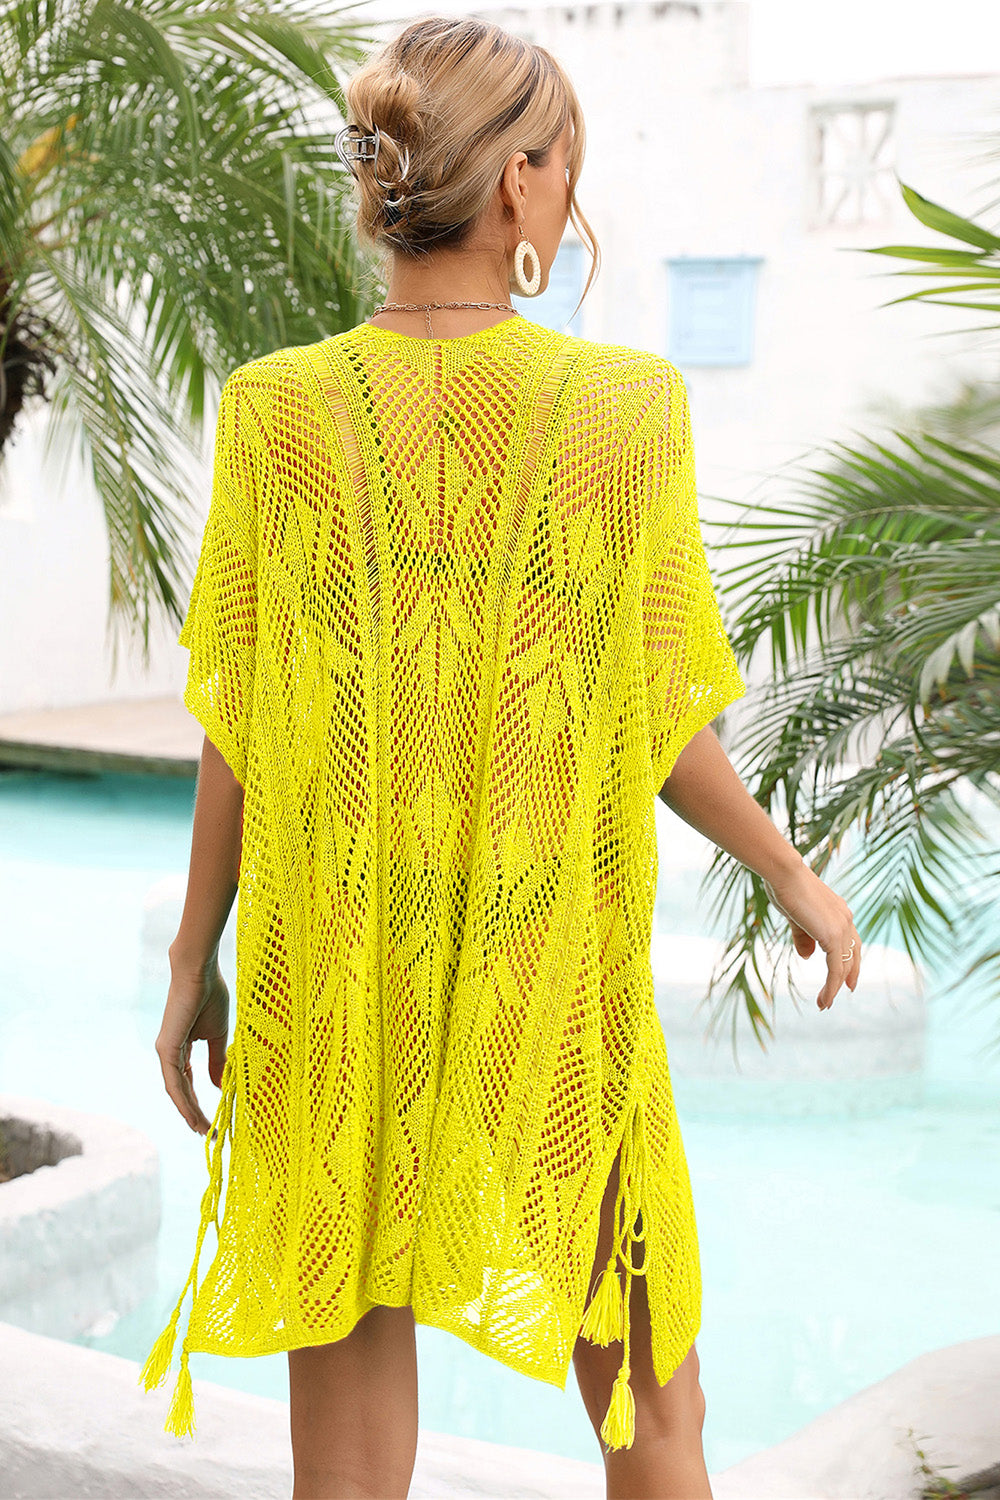 Lace Up Side Knit Beach Cover Up